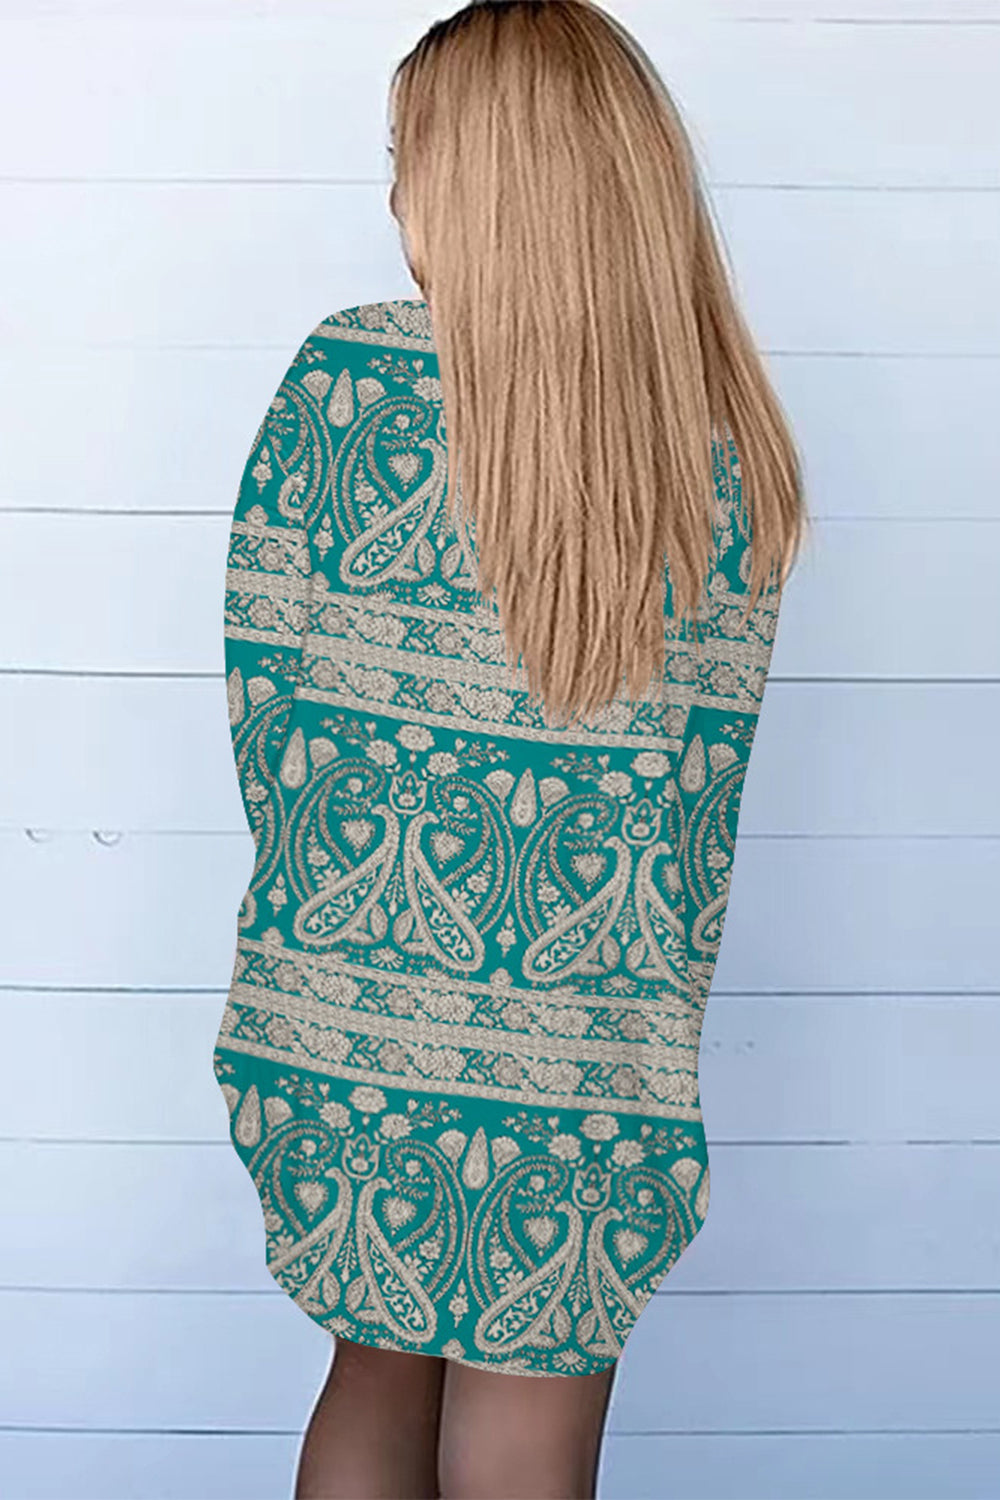 Back View, Long Sleeve Cardigan In Teal